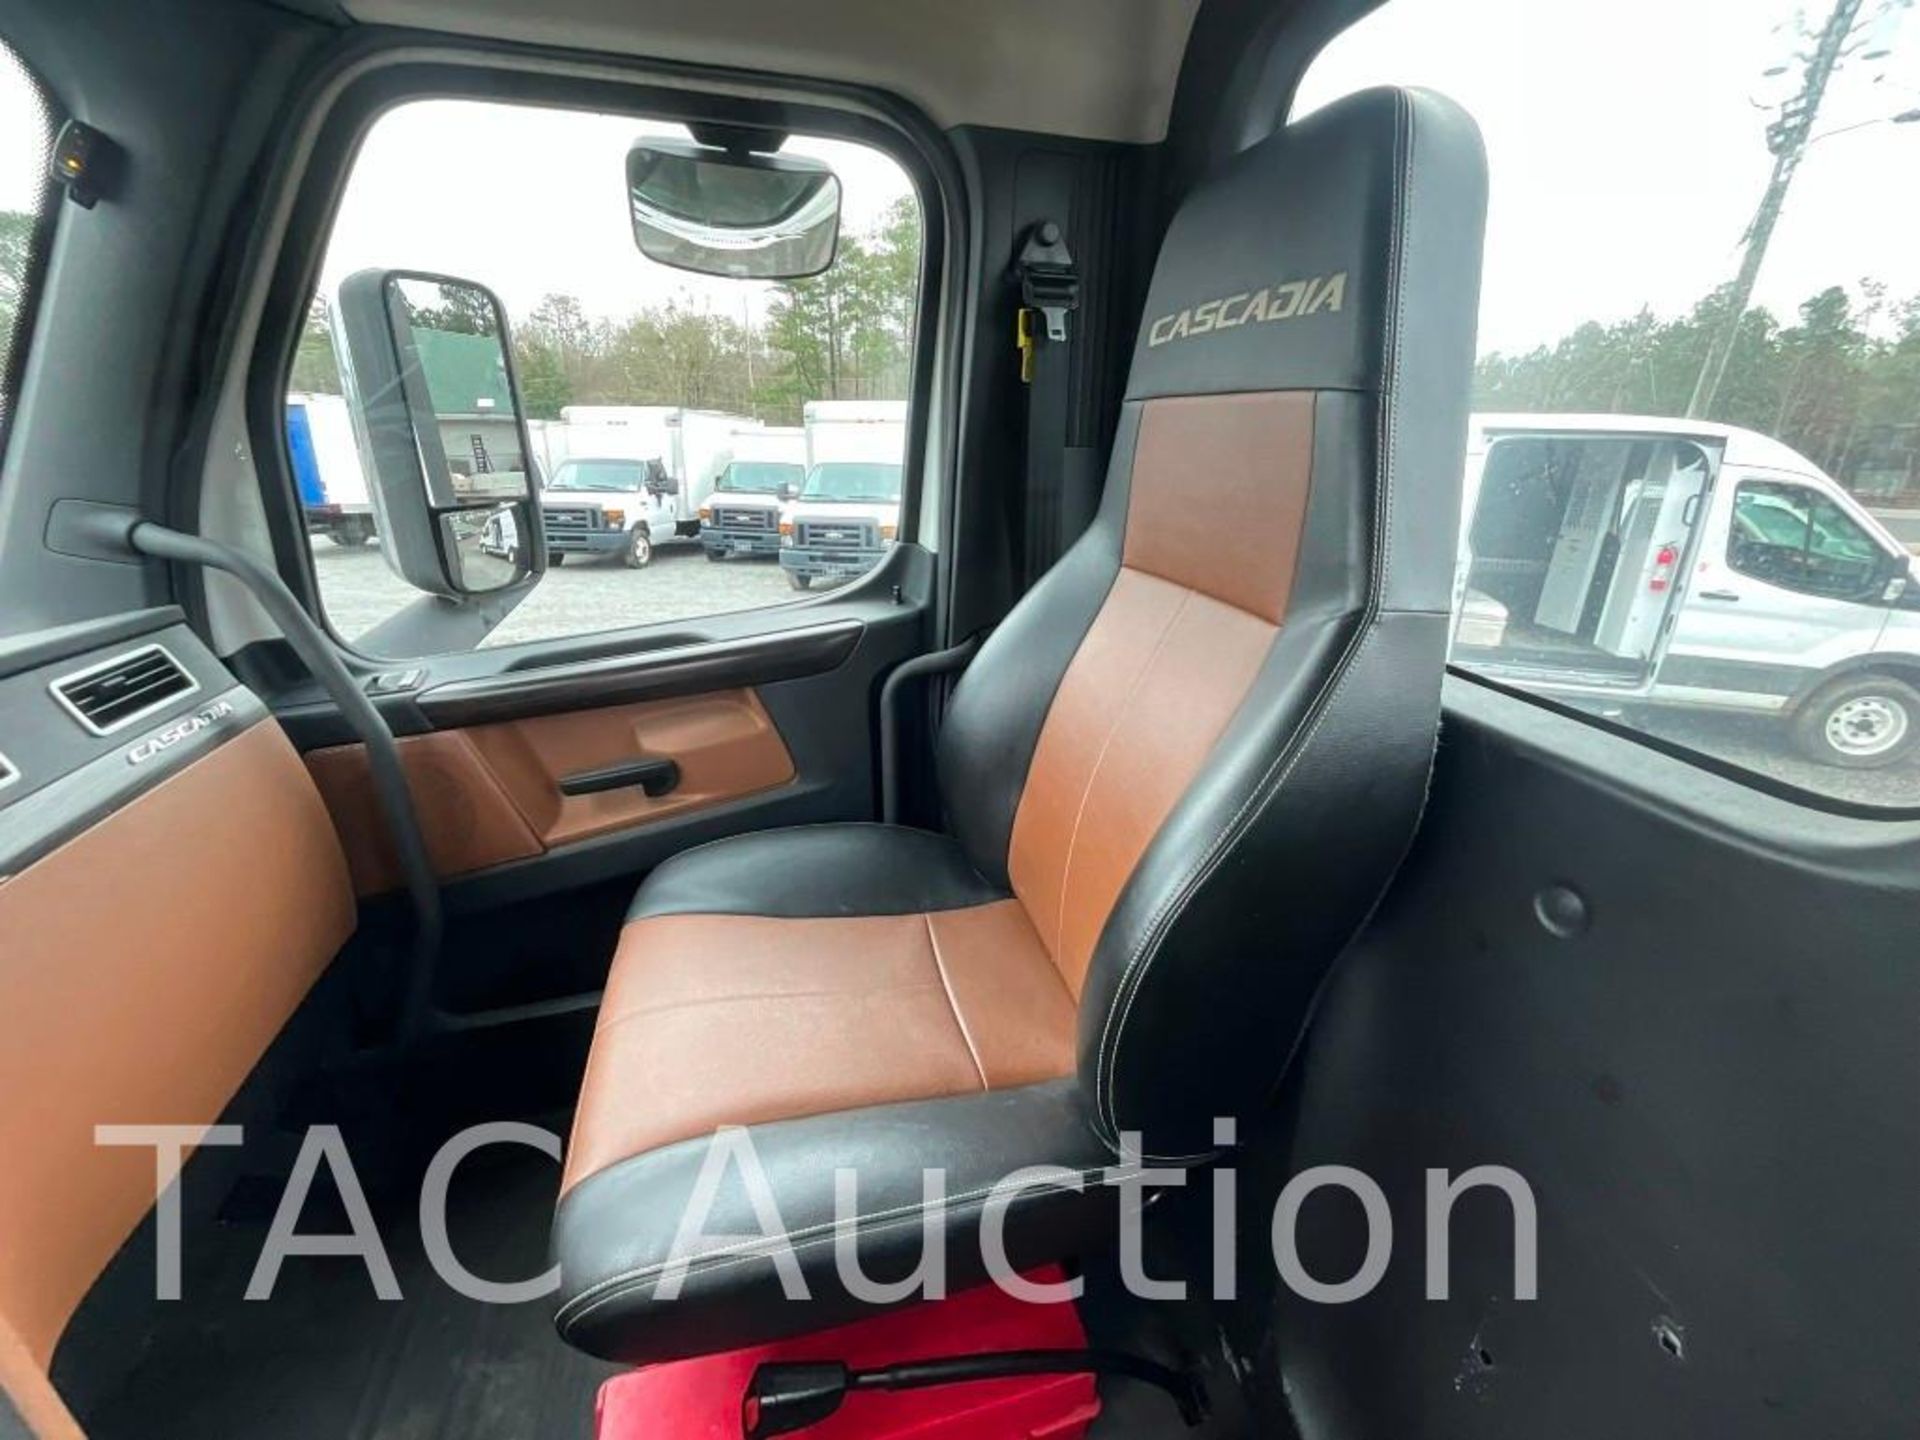 2019 Freightliner Cascadia Day Cab - Image 18 of 54